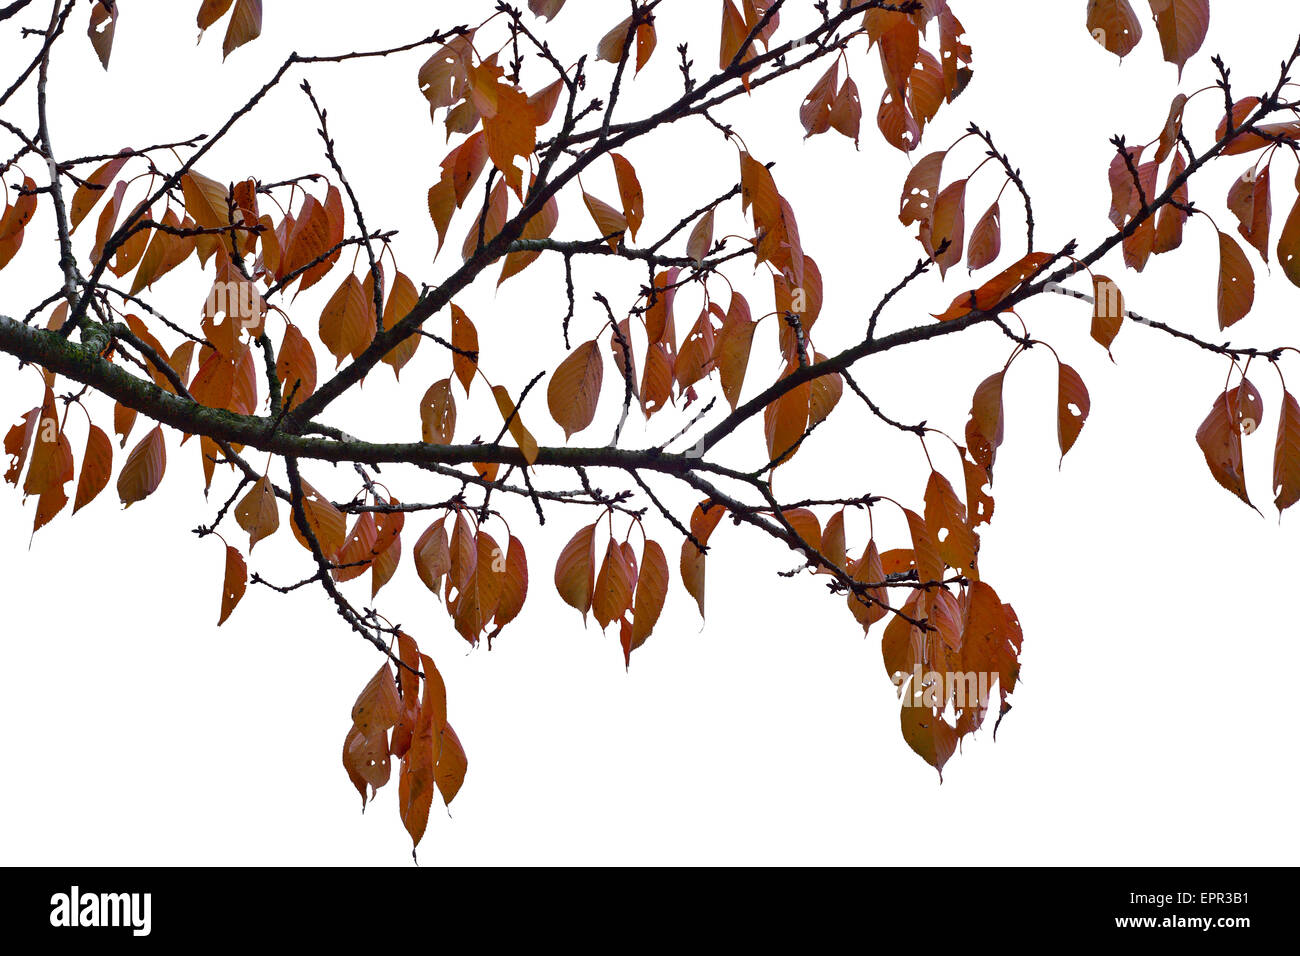 Autumn Leaves Isolated on White as Design Element Stock Photo